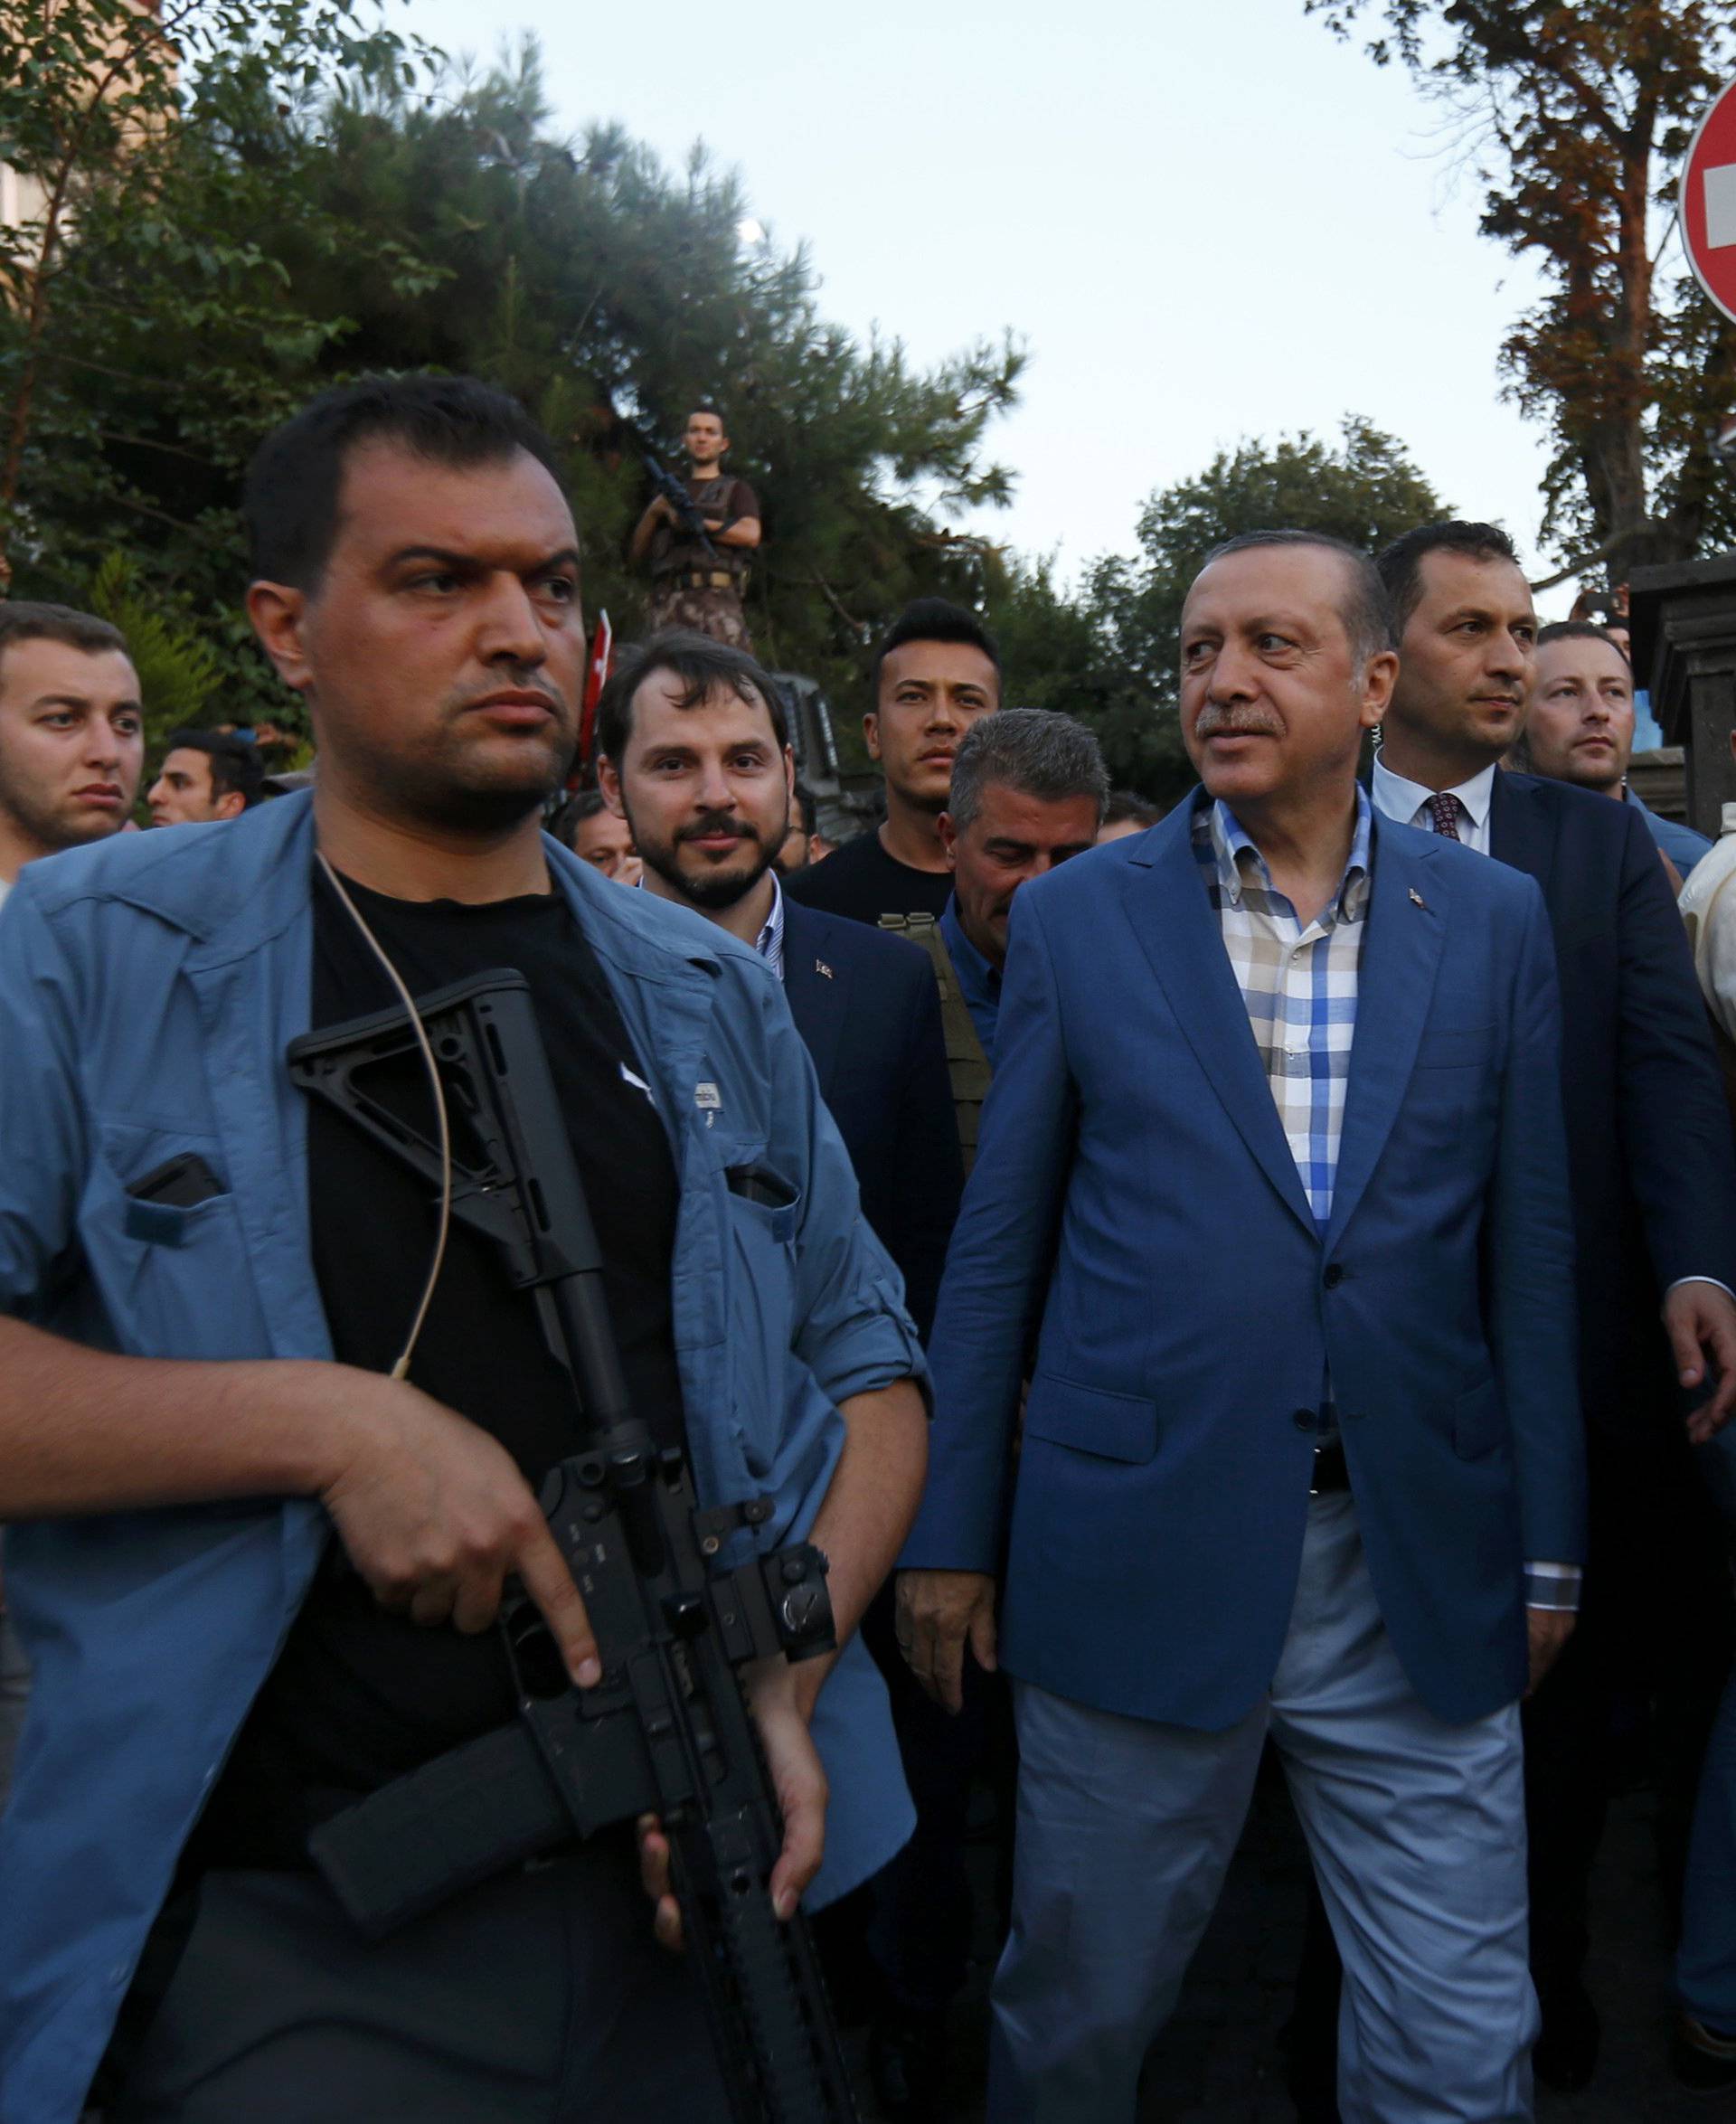 Turkish President Tayyip Erdogan walks through the crowd of supporters protected by bodyguards in Istanbul